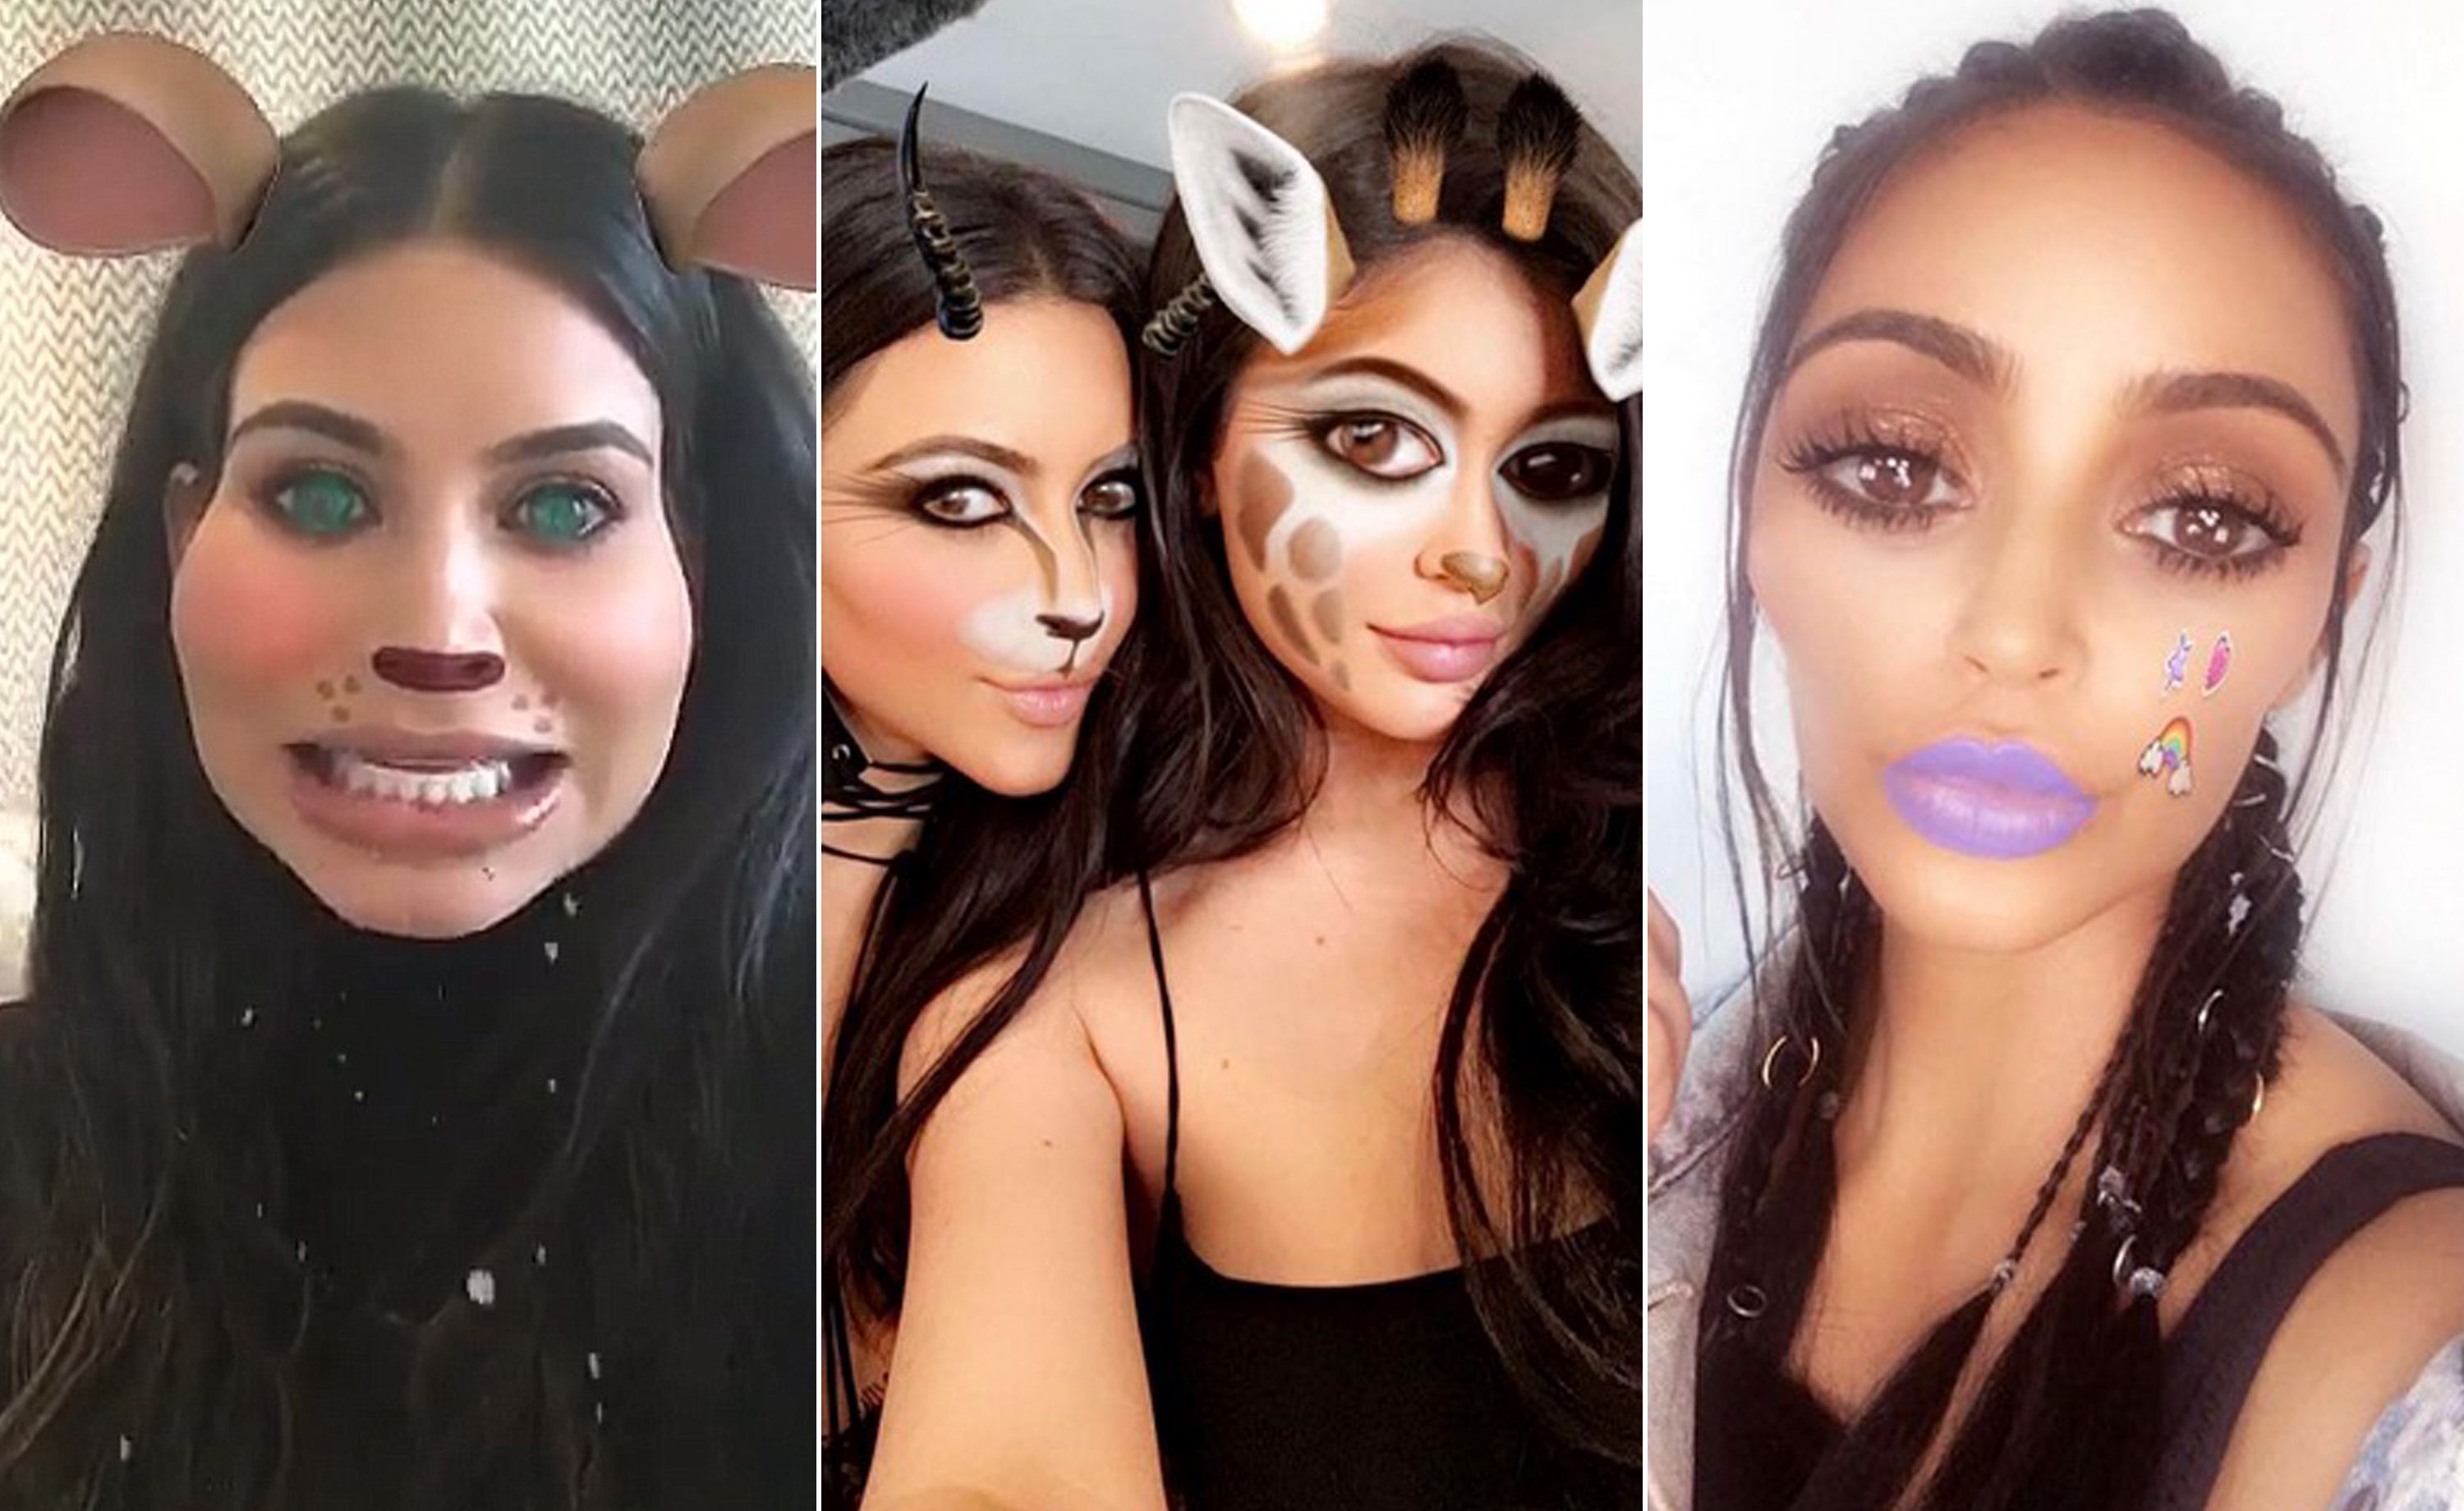 app will let you create your own Snapchat filters